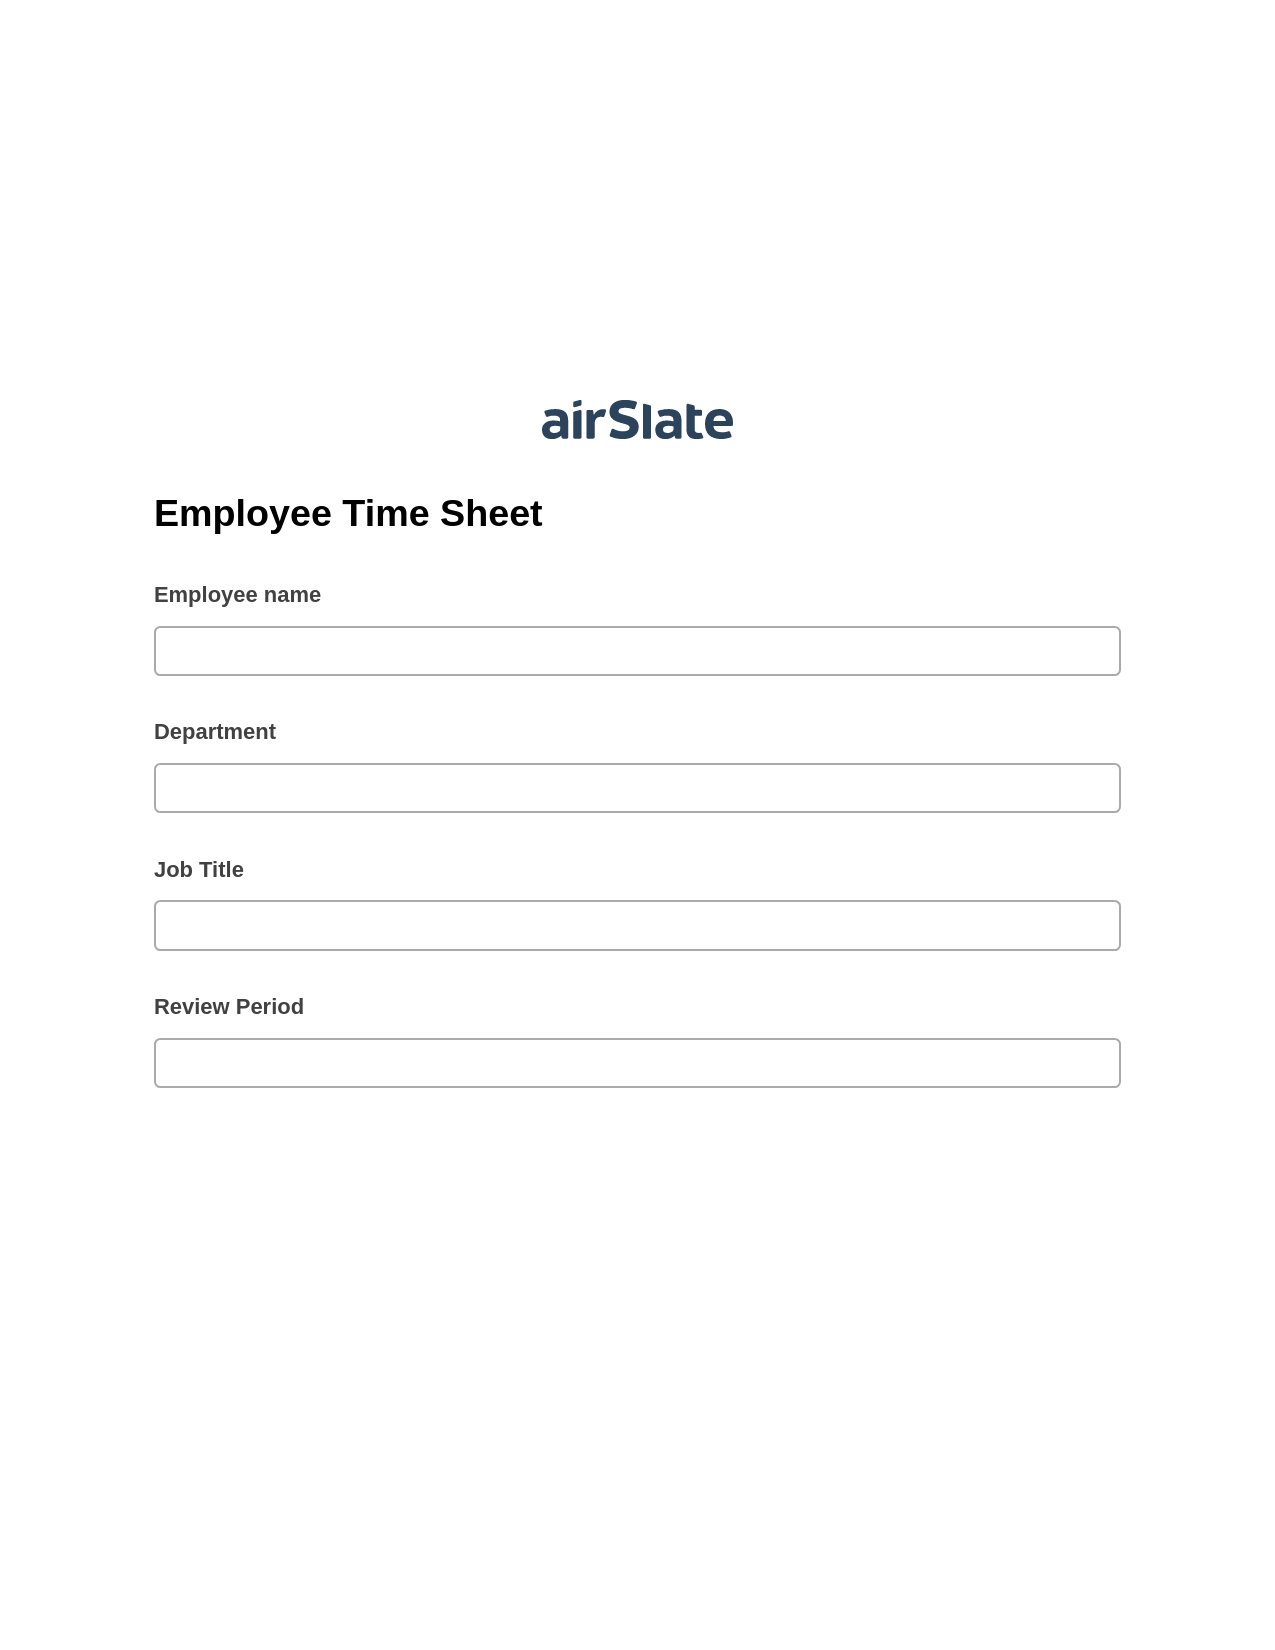 Multirole Employee Time Sheet Pre-fill Dropdowns from CSV file Bot, Create Slate every Google Sheet Update Bot, Export to Google Sheet Bot